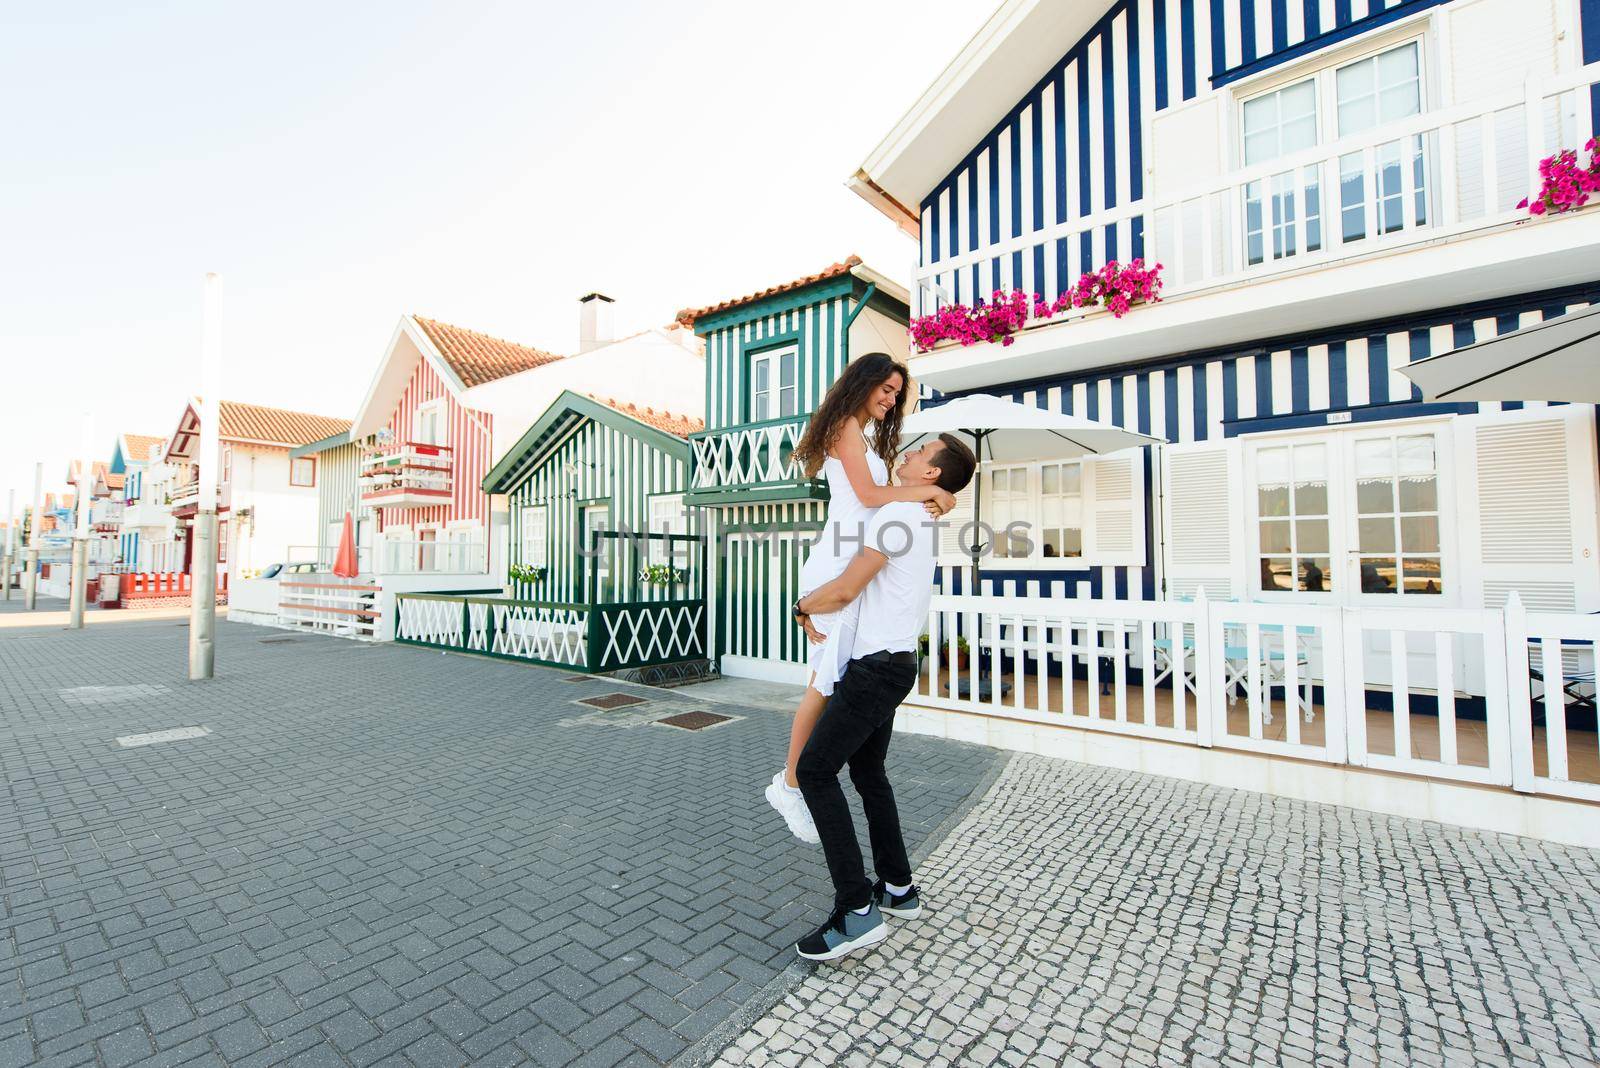 Young couple in white clothes walks around street in Aveiro, Portugal near colourful and peaceful houses. Lifestyle. Having fun, laughs, smiles.